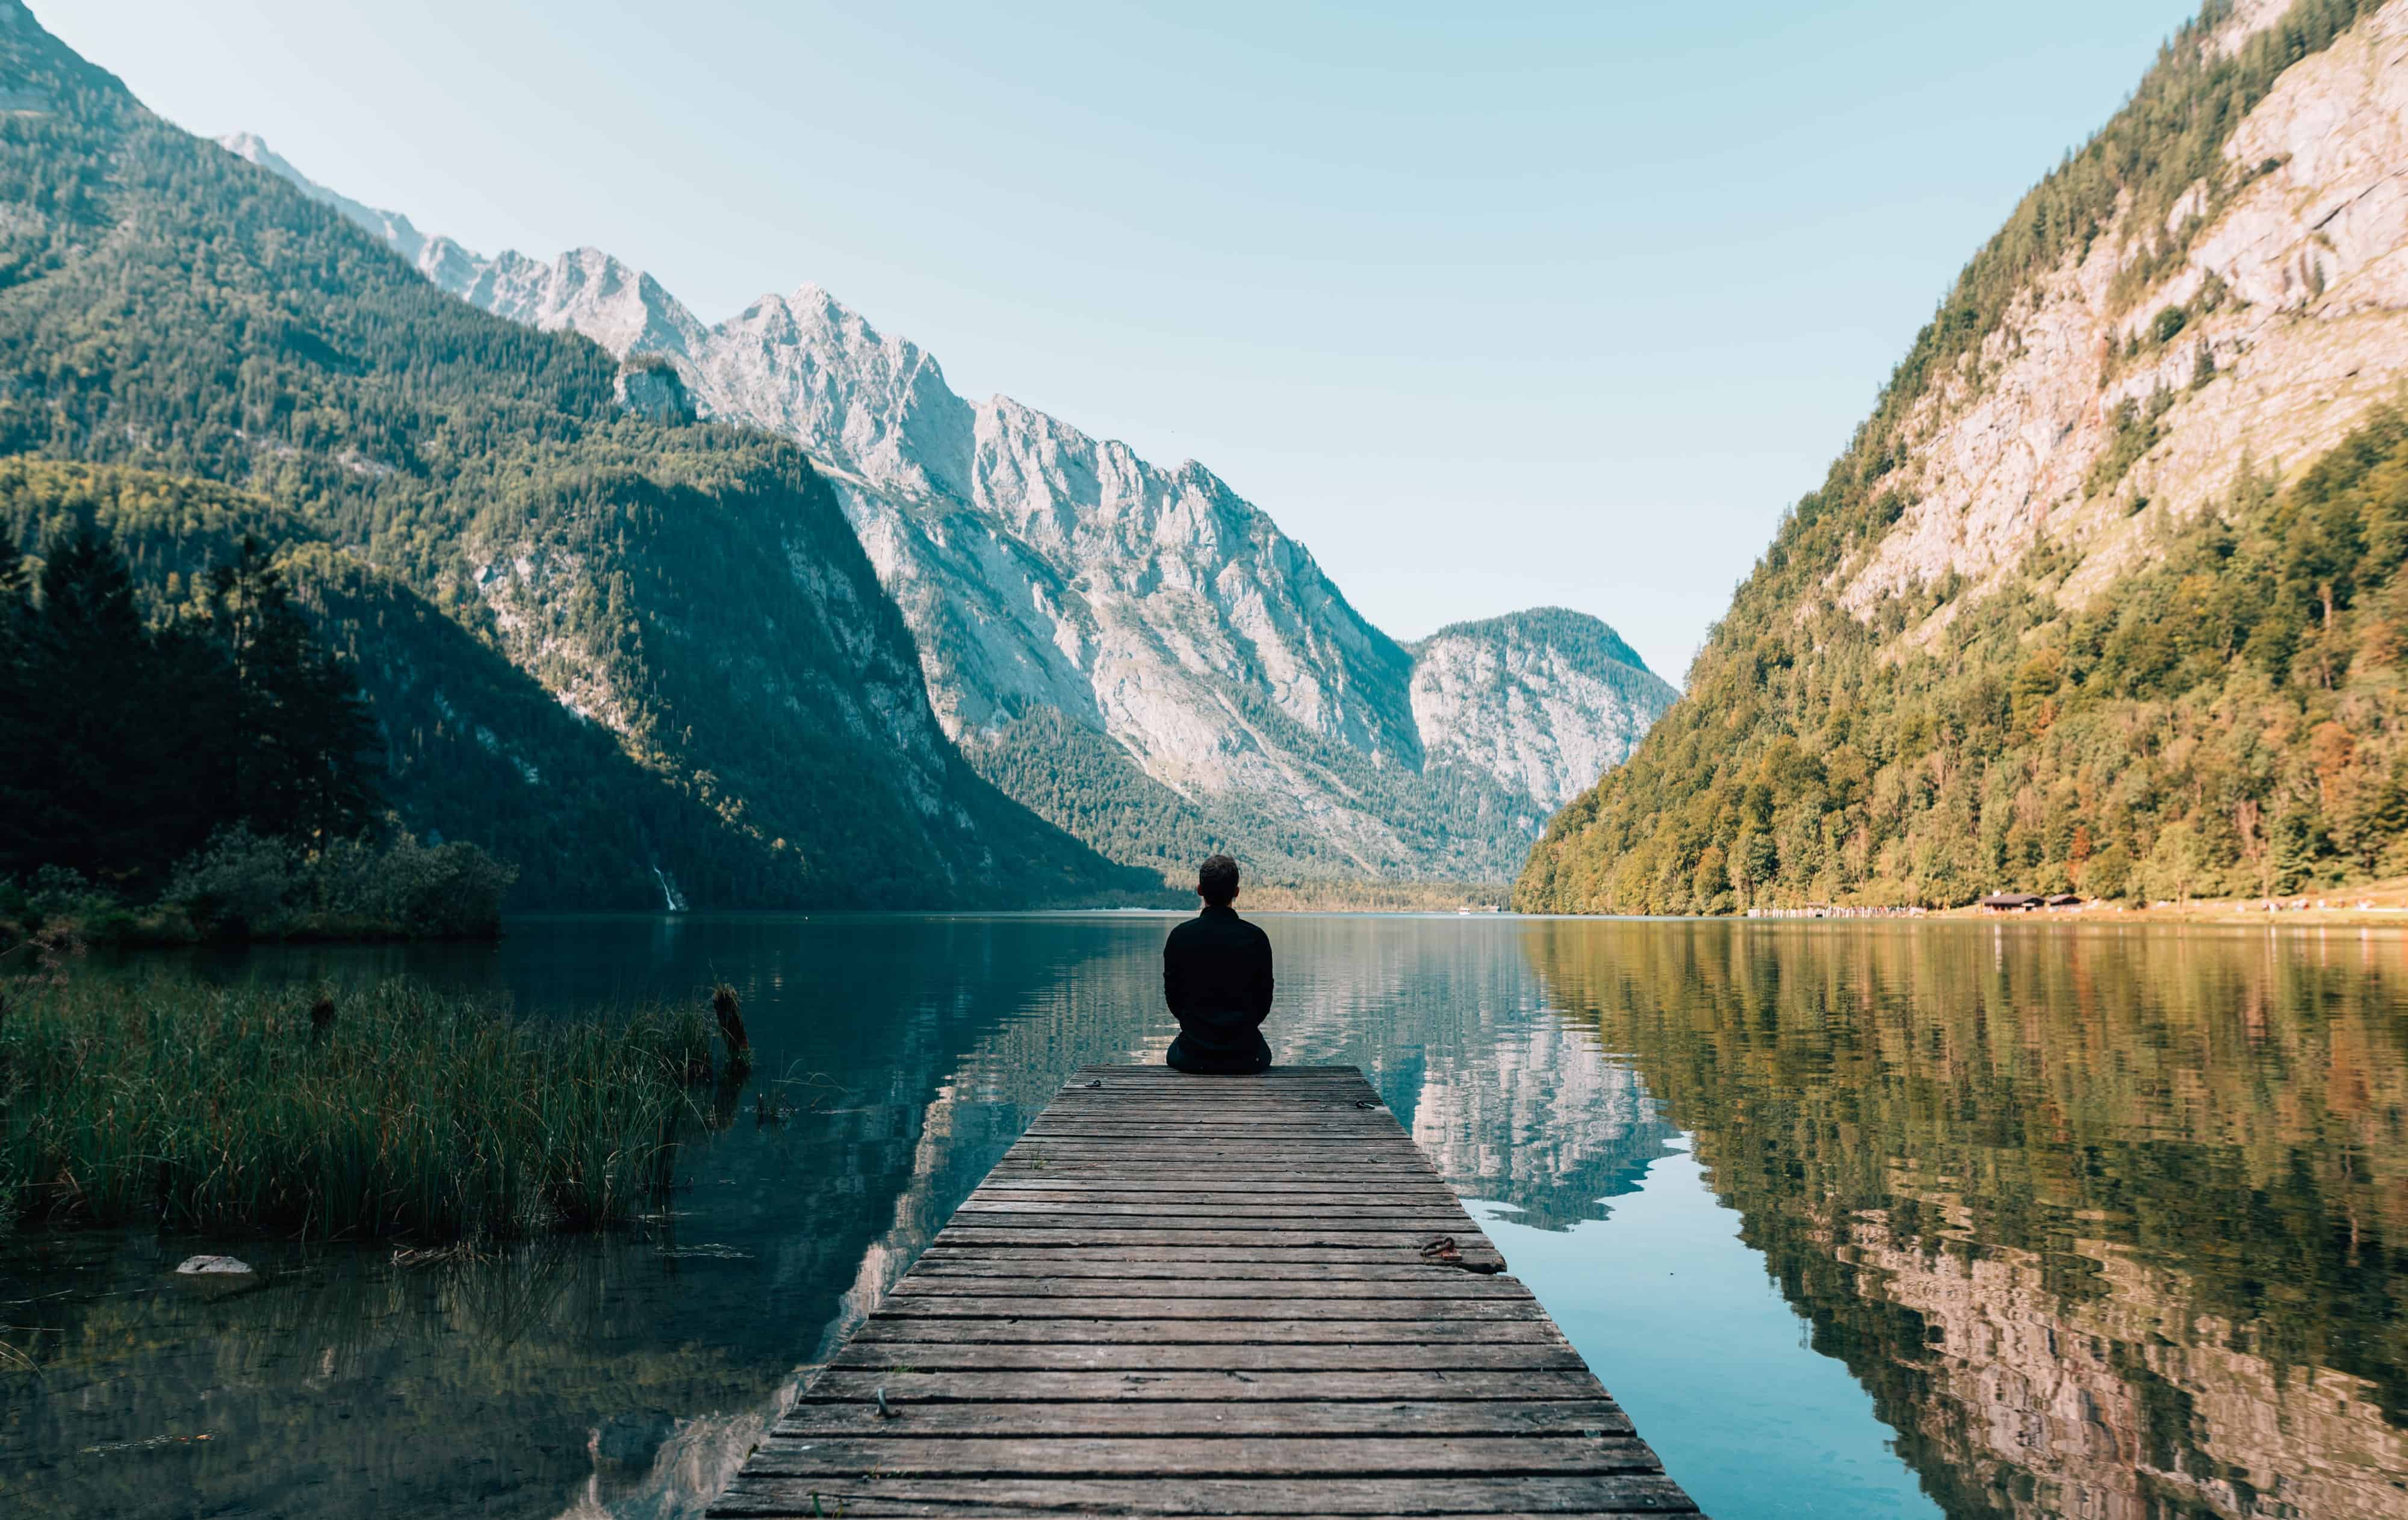 Learn These 3 Important Benefits of Meditation That Will Change Your Life